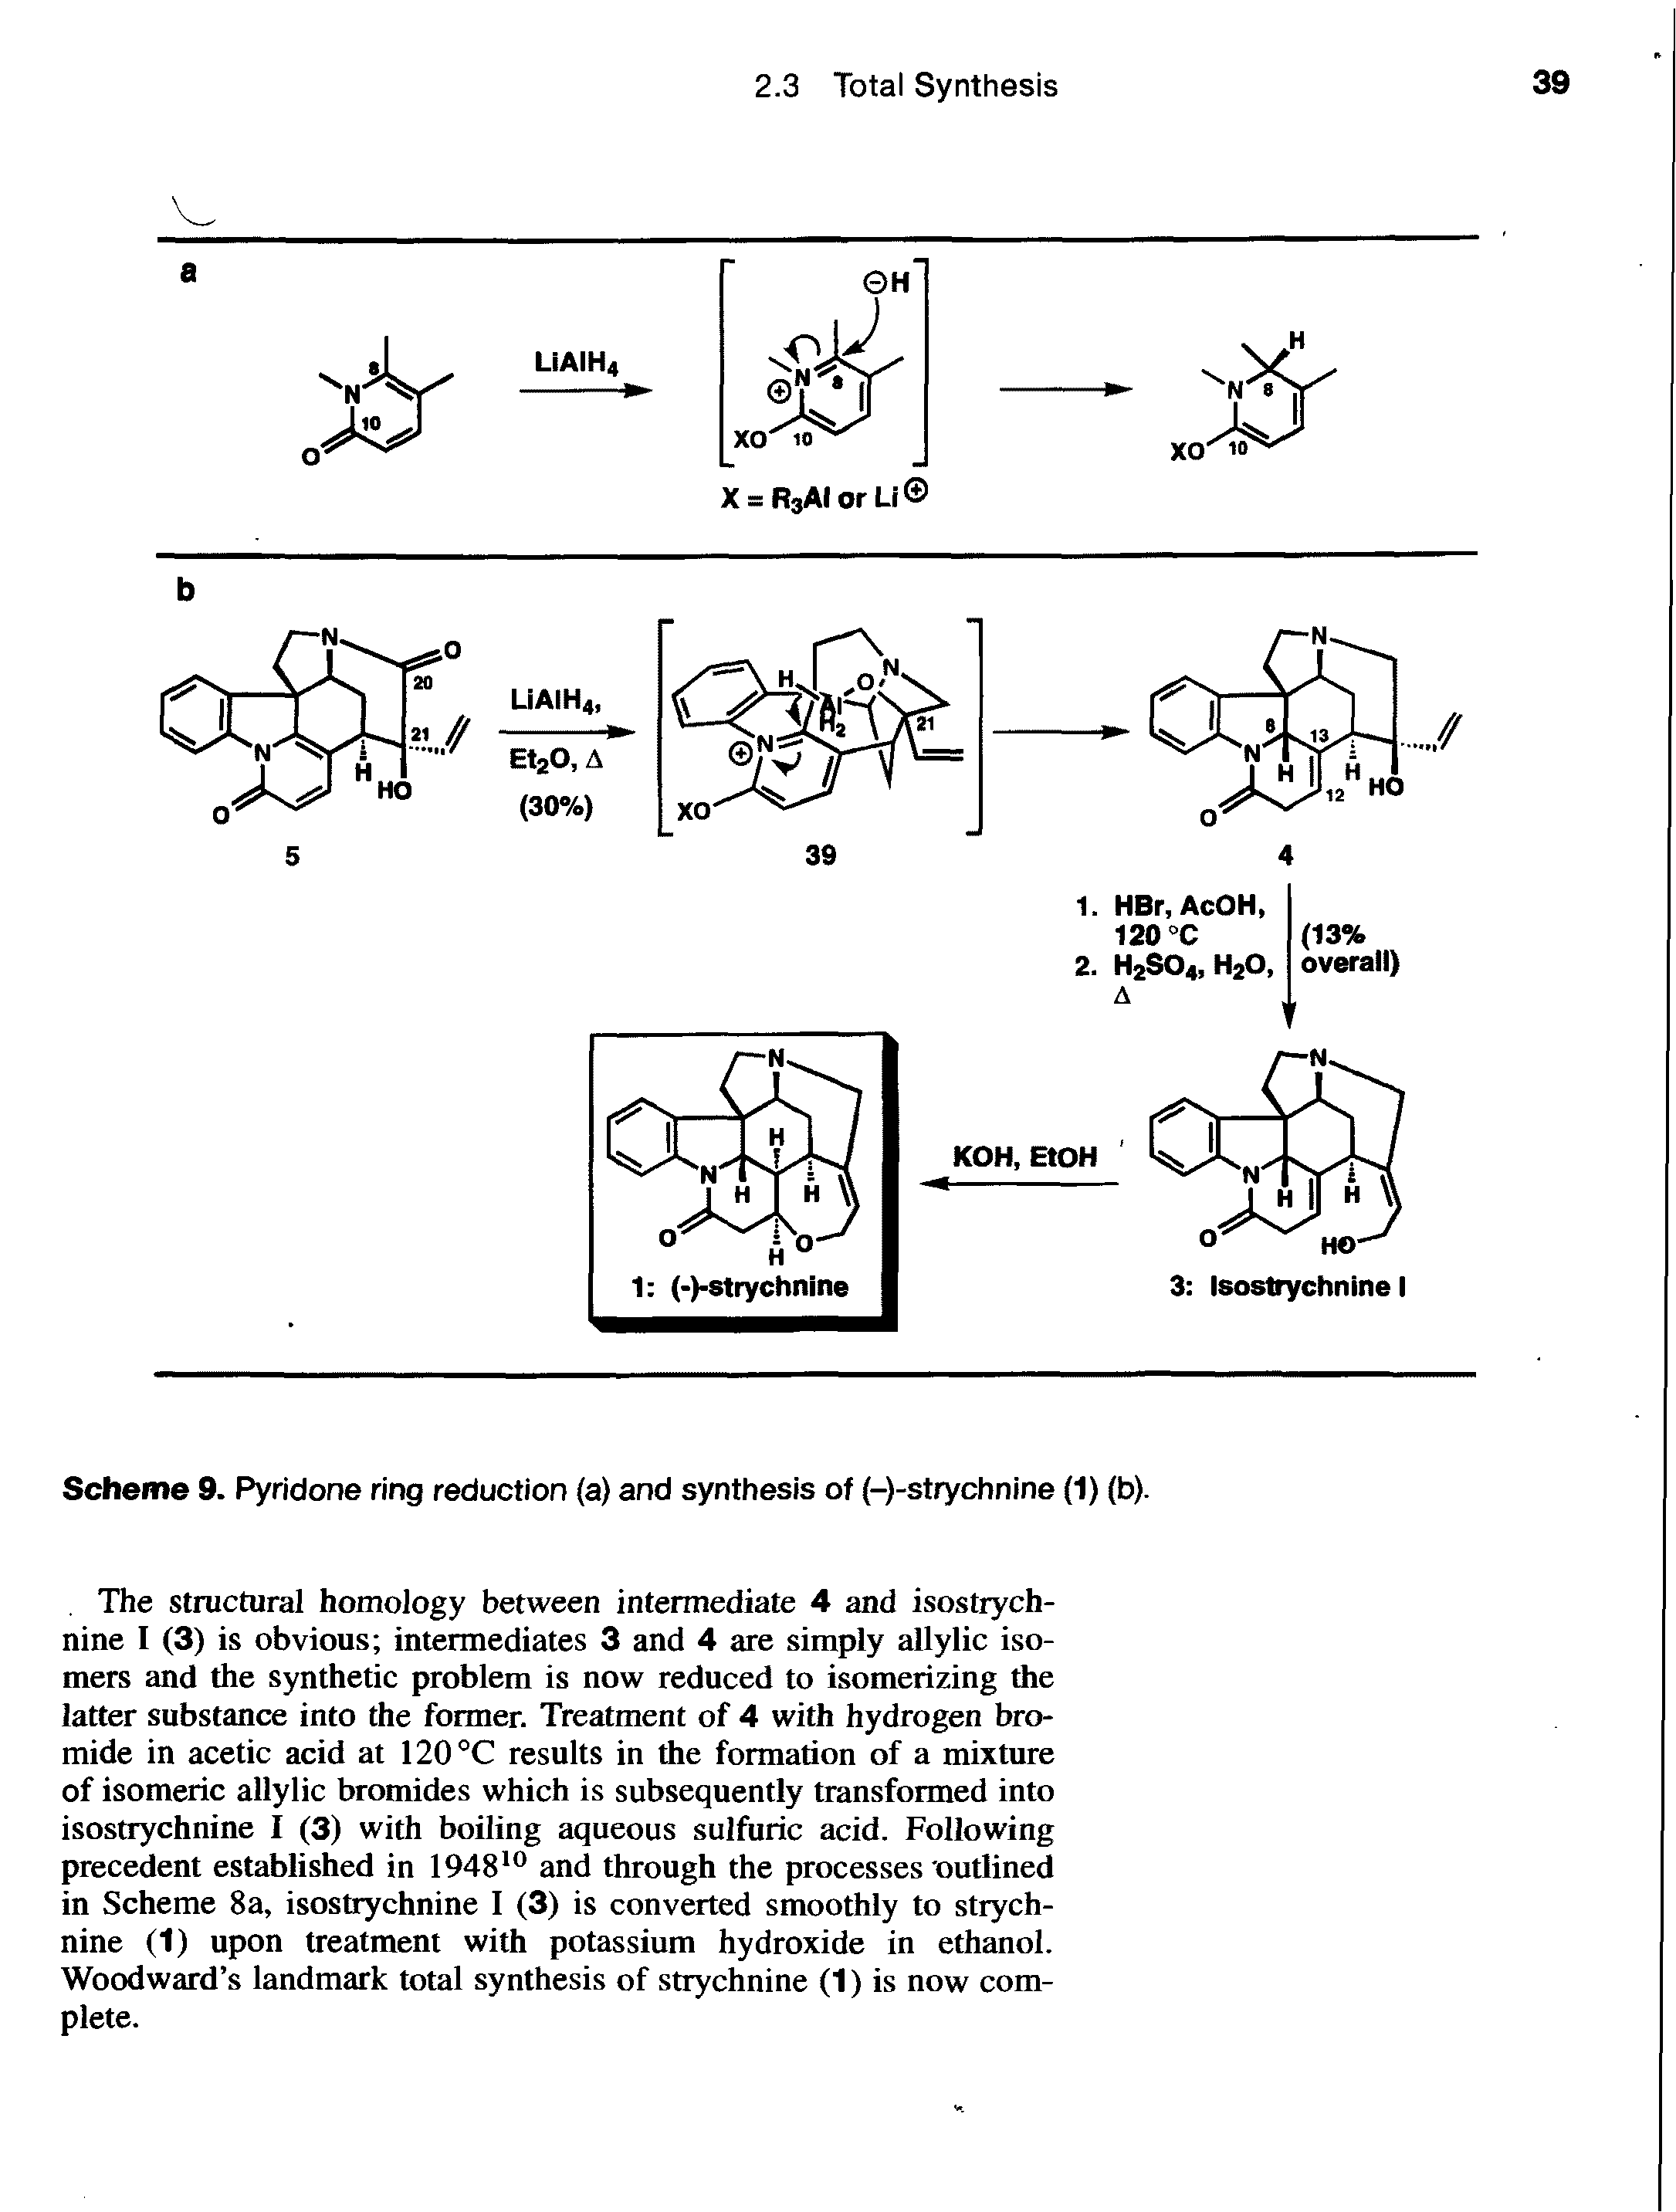 Scheme 9. Pyridone ring reduction (a) and synthesis of (-)-strychnine (1) (b).